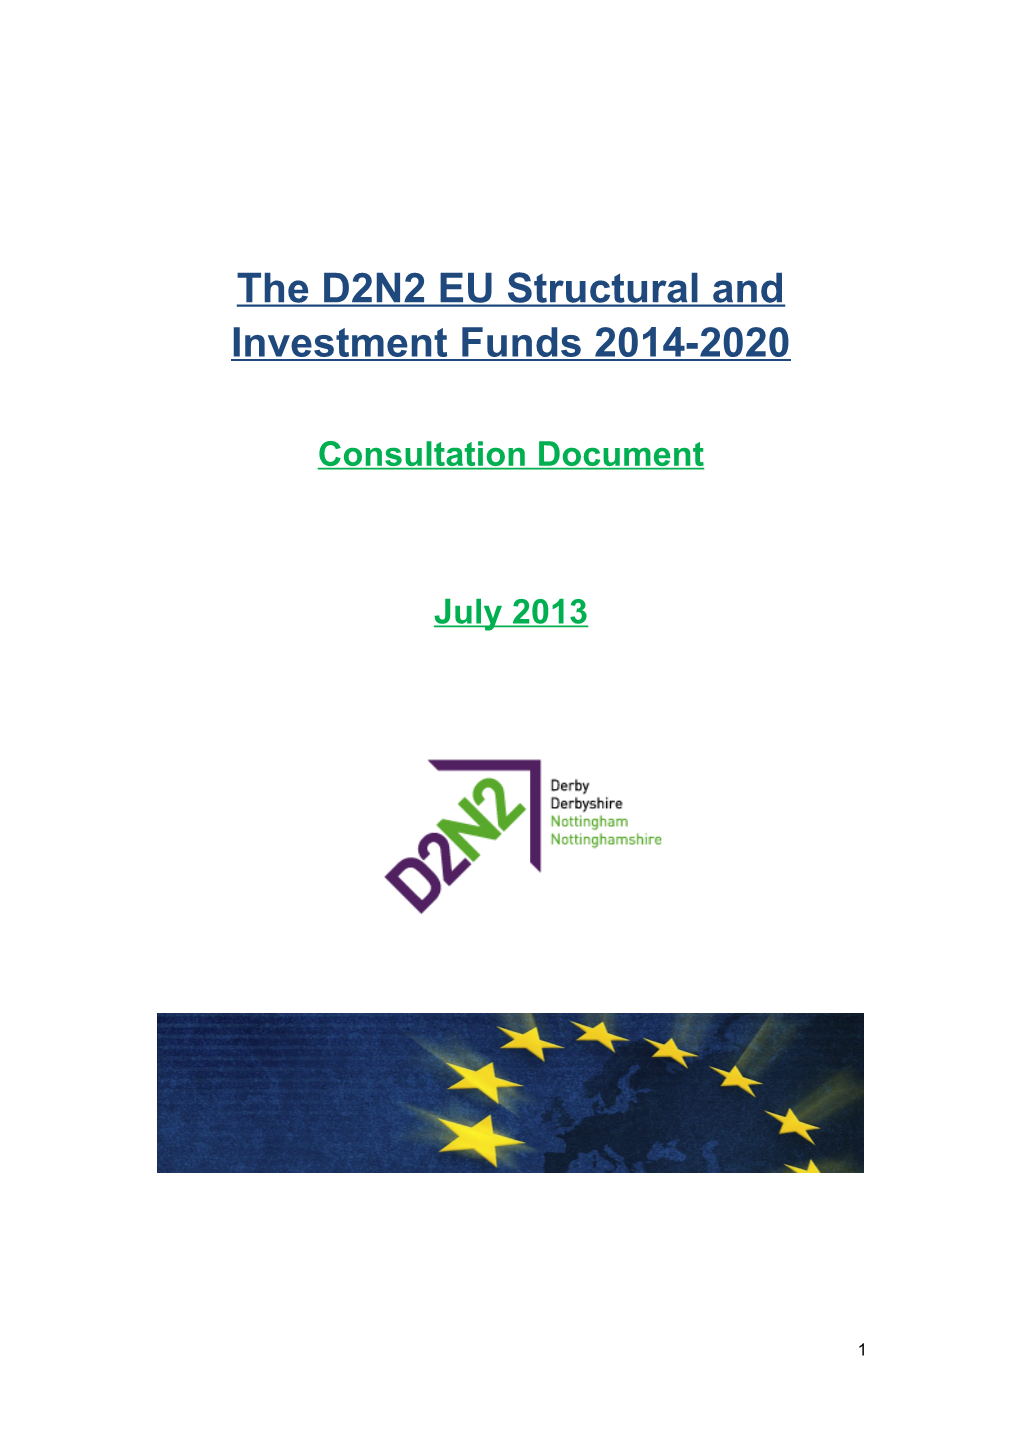 The D2N2 EU Structural and Investment Funds 2014-2020